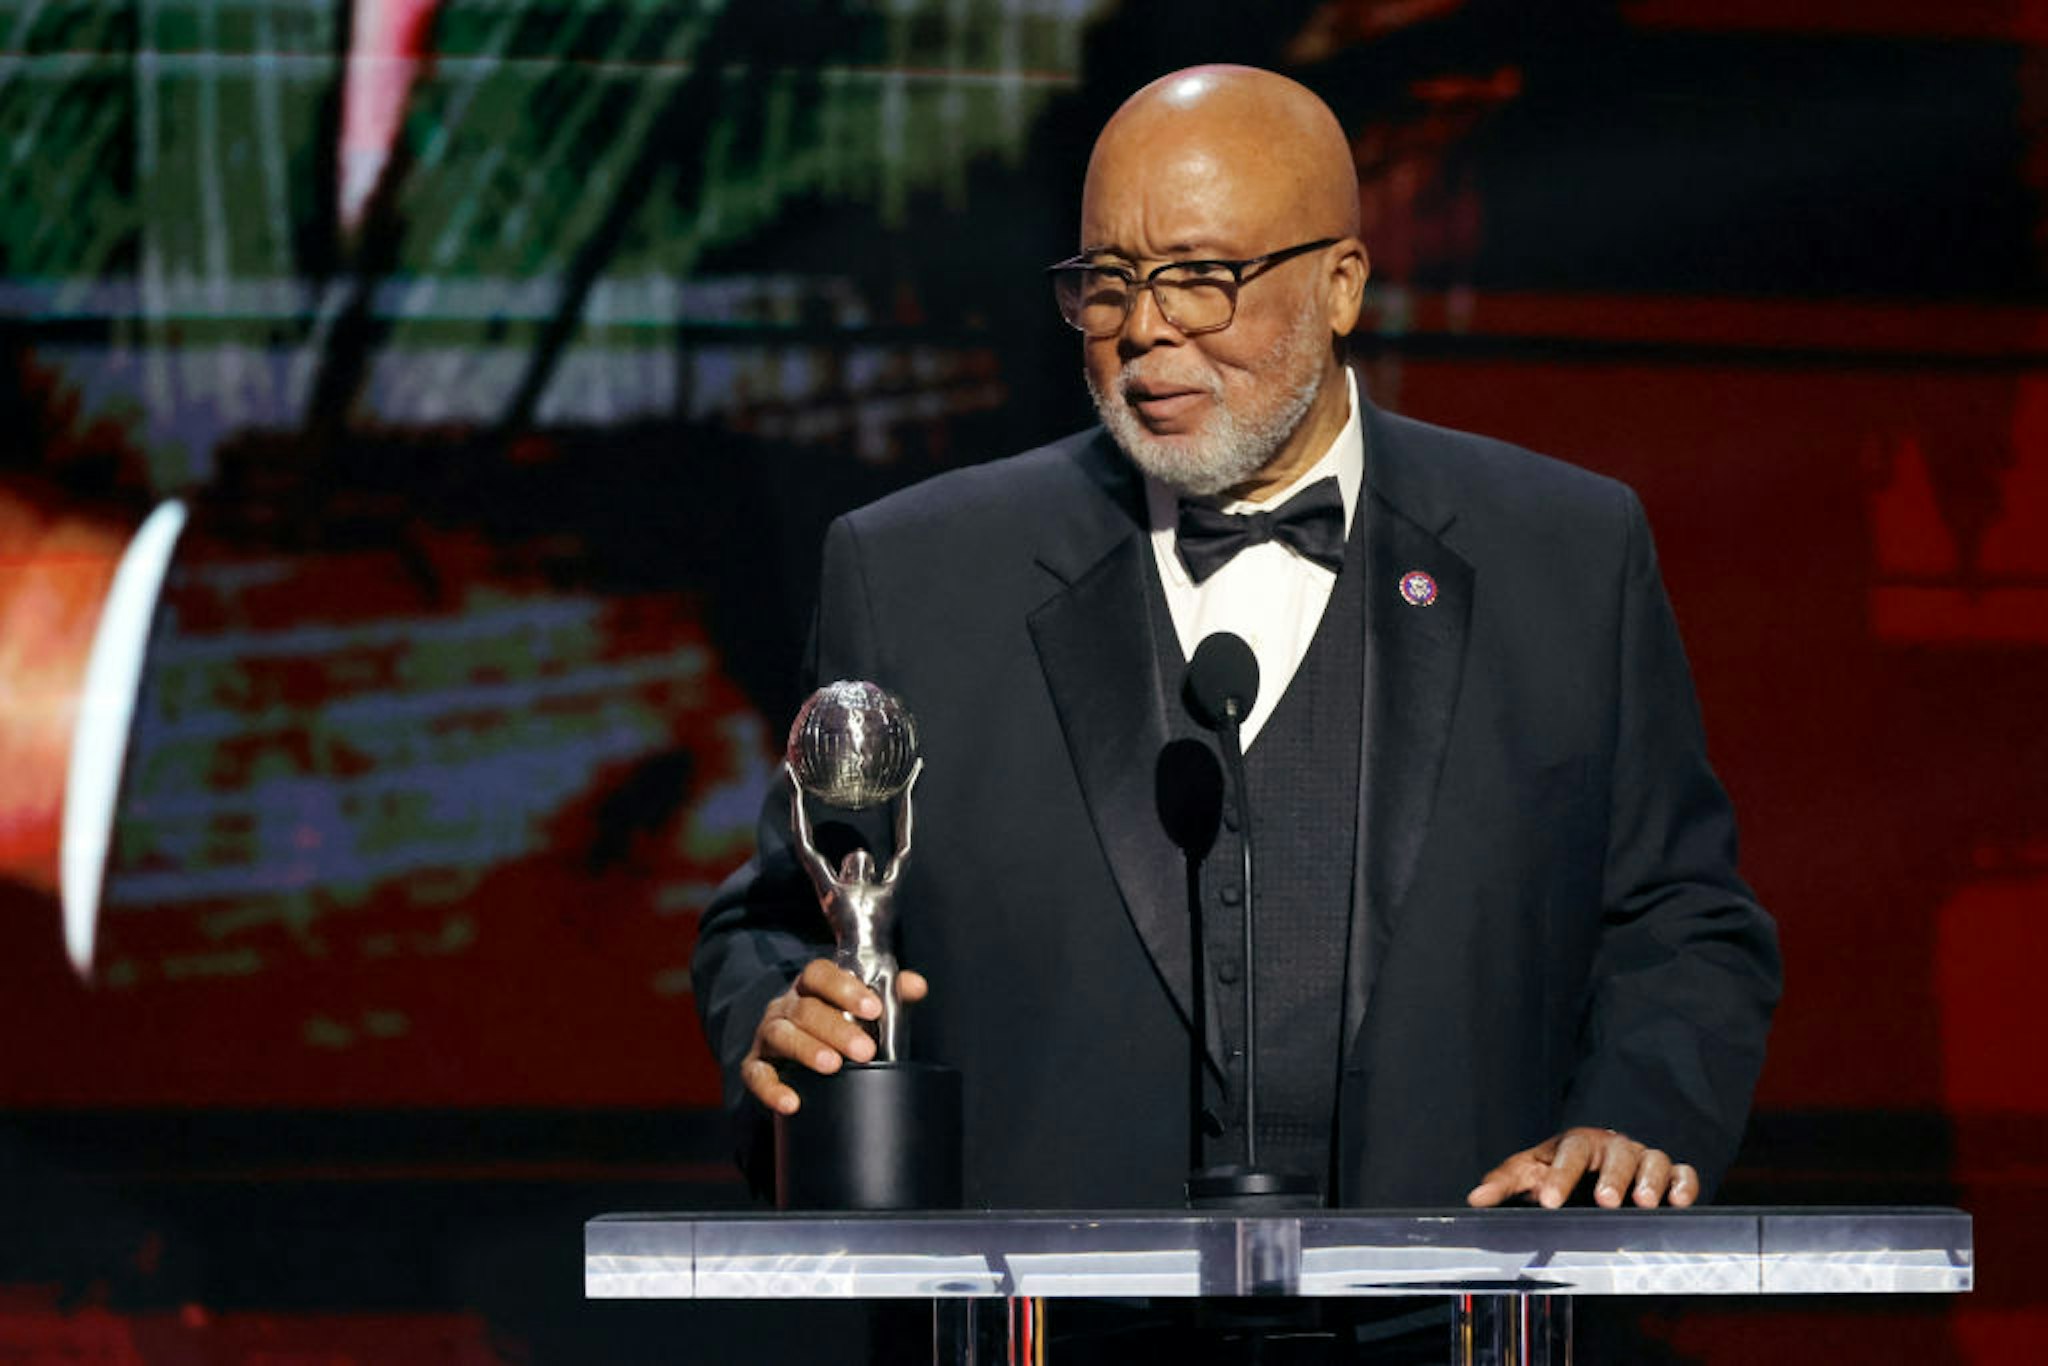 PASADENA, CALIFORNIA - FEBRUARY 25: Honoree United States Representative Bennie G. Thompson (D-MS) accepts the Chairman's Award onstage during the 54th NAACP Image Awards at Pasadena Civic Auditorium on February 25, 2023 in Pasadena, California. (Photo by Amy Sussman/Getty Images)